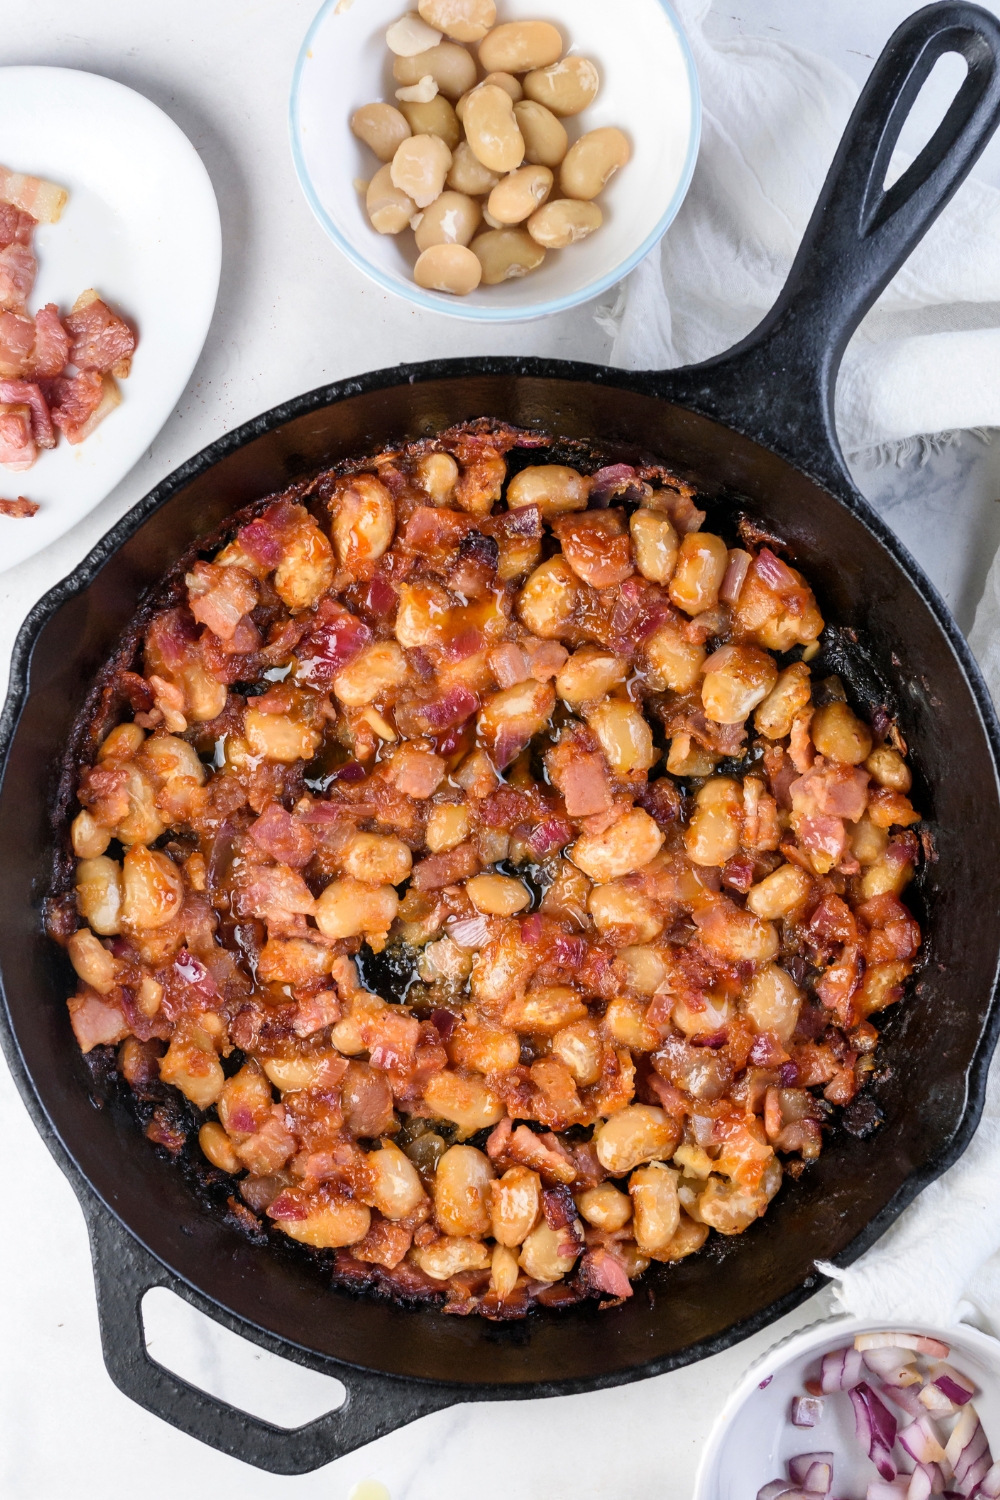 A black skillet filled with fresh baked beans and bacon all coated in a brown sauce.